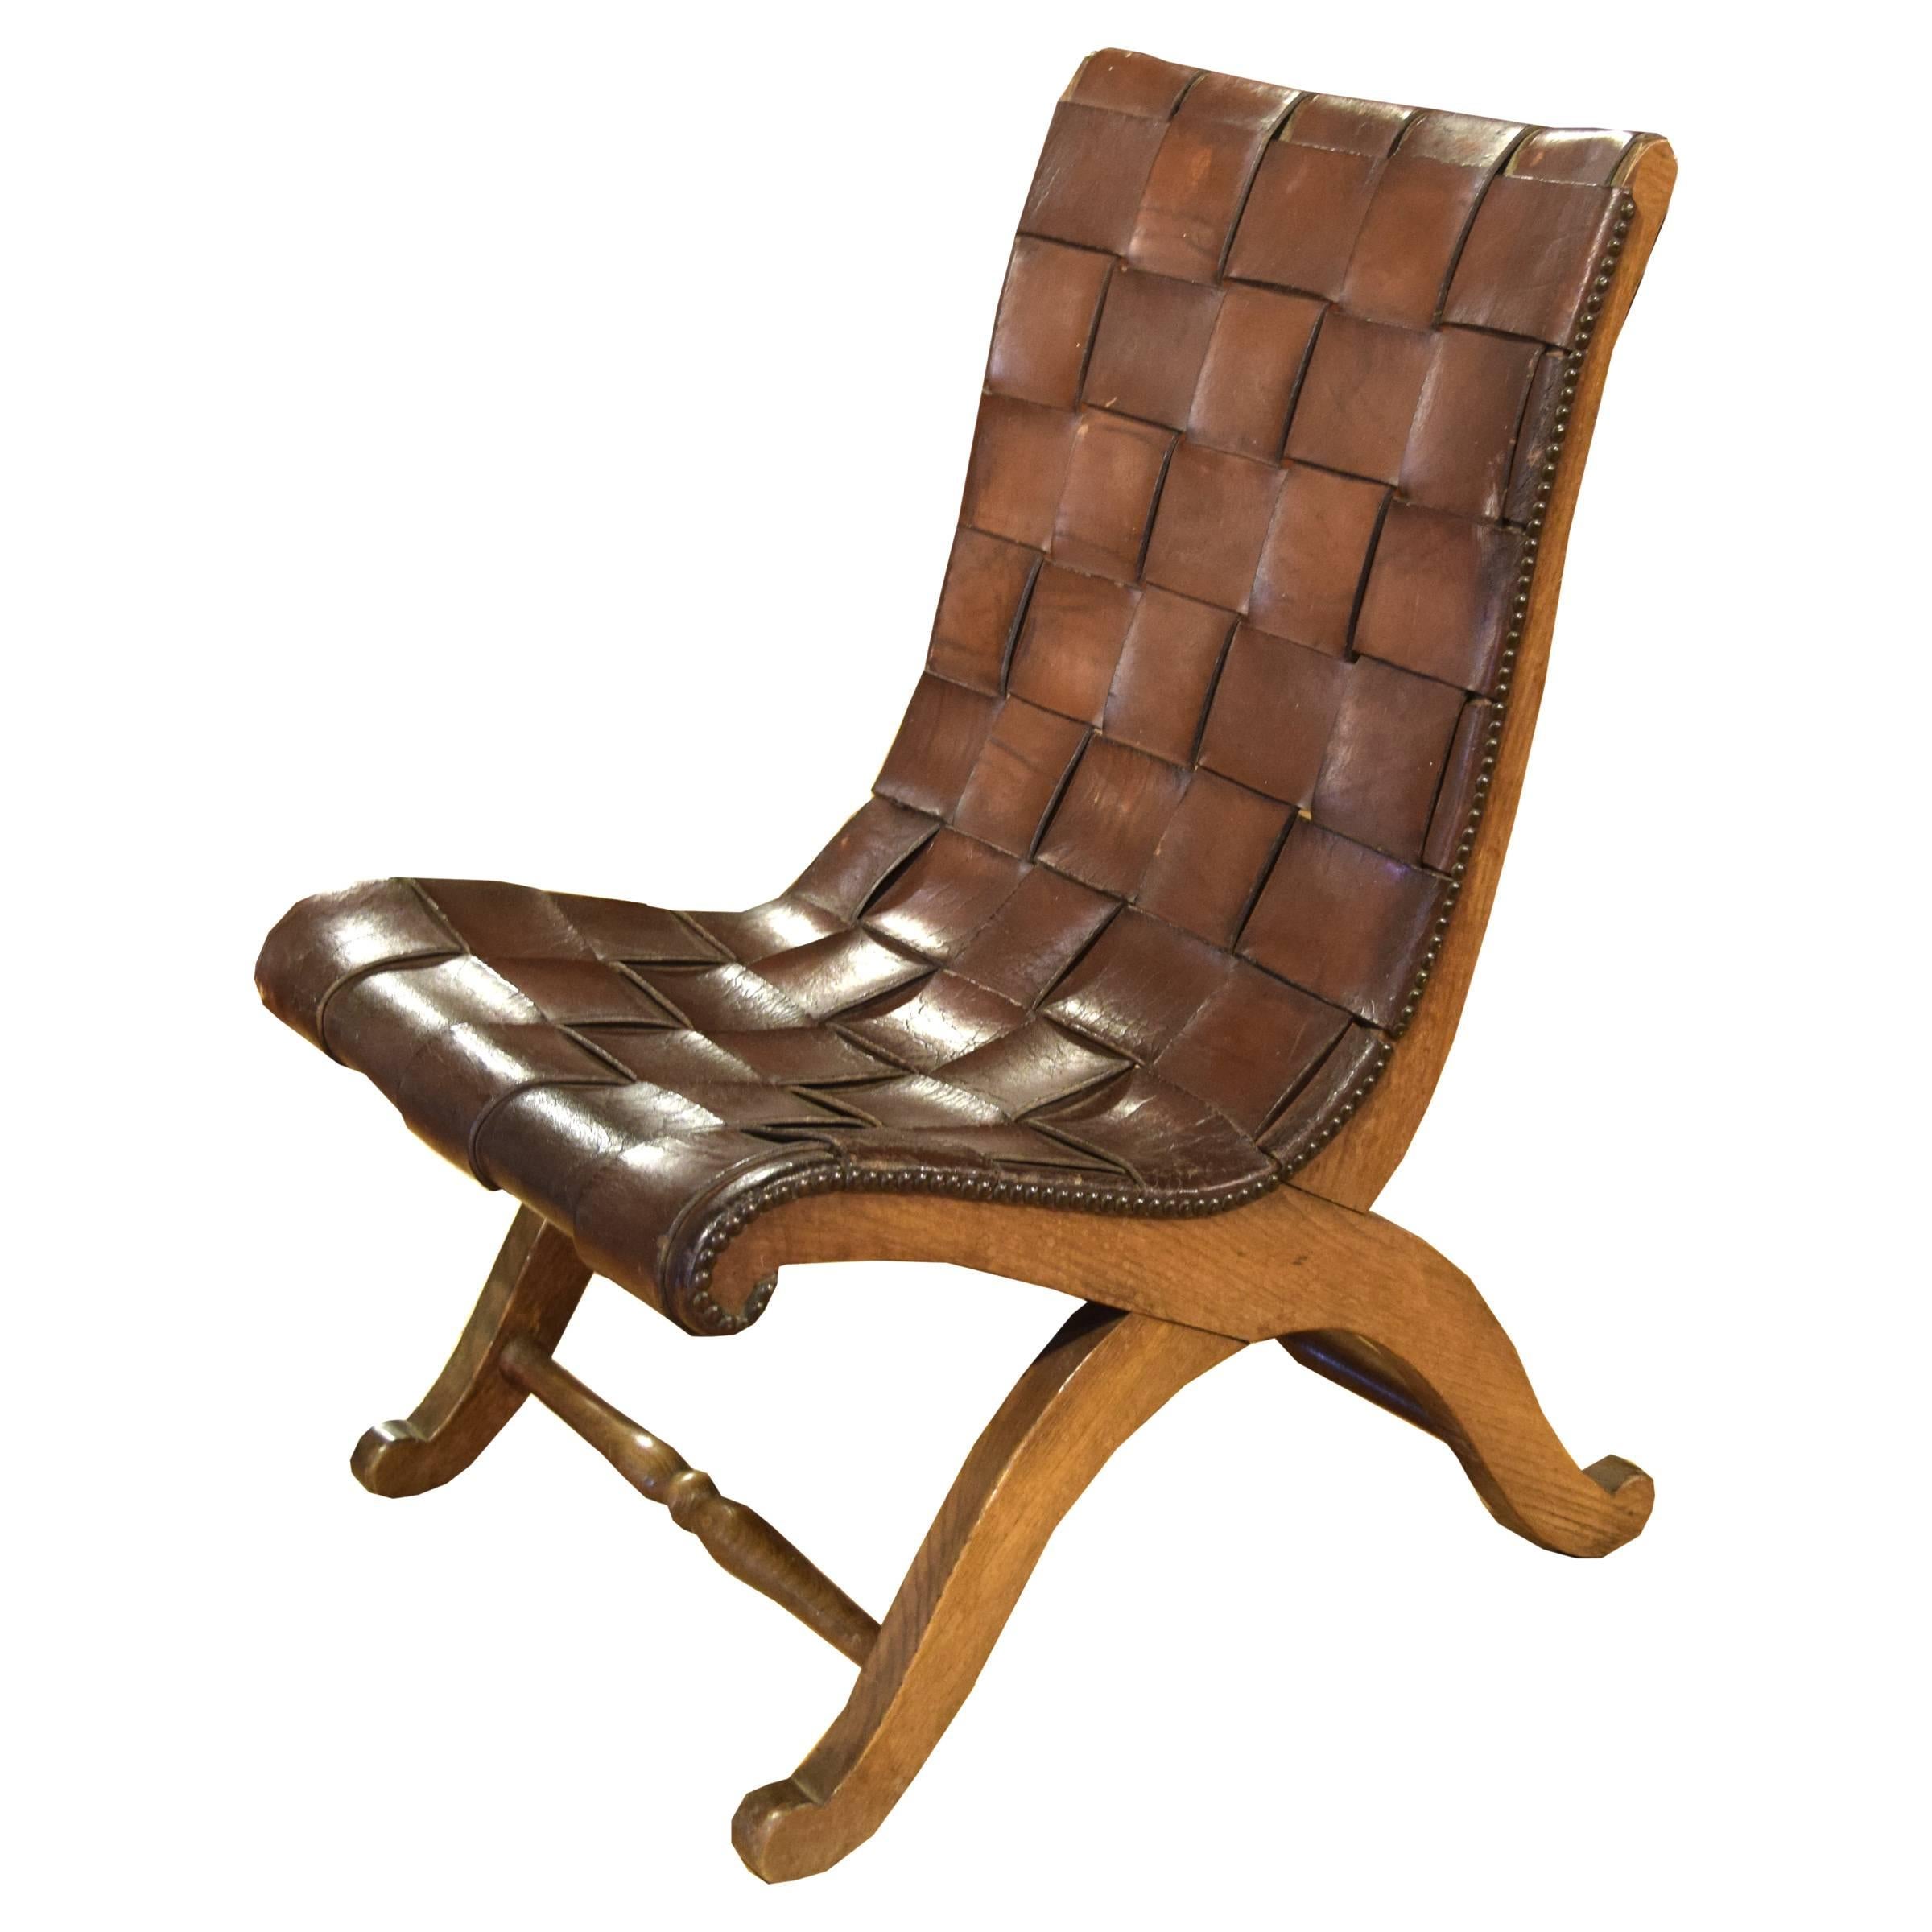 A French side chair having a rich brown woven leather back and seat atop a wooden frame with sinuous curved legs and turned stretchers, with a great patina, circa 1920.